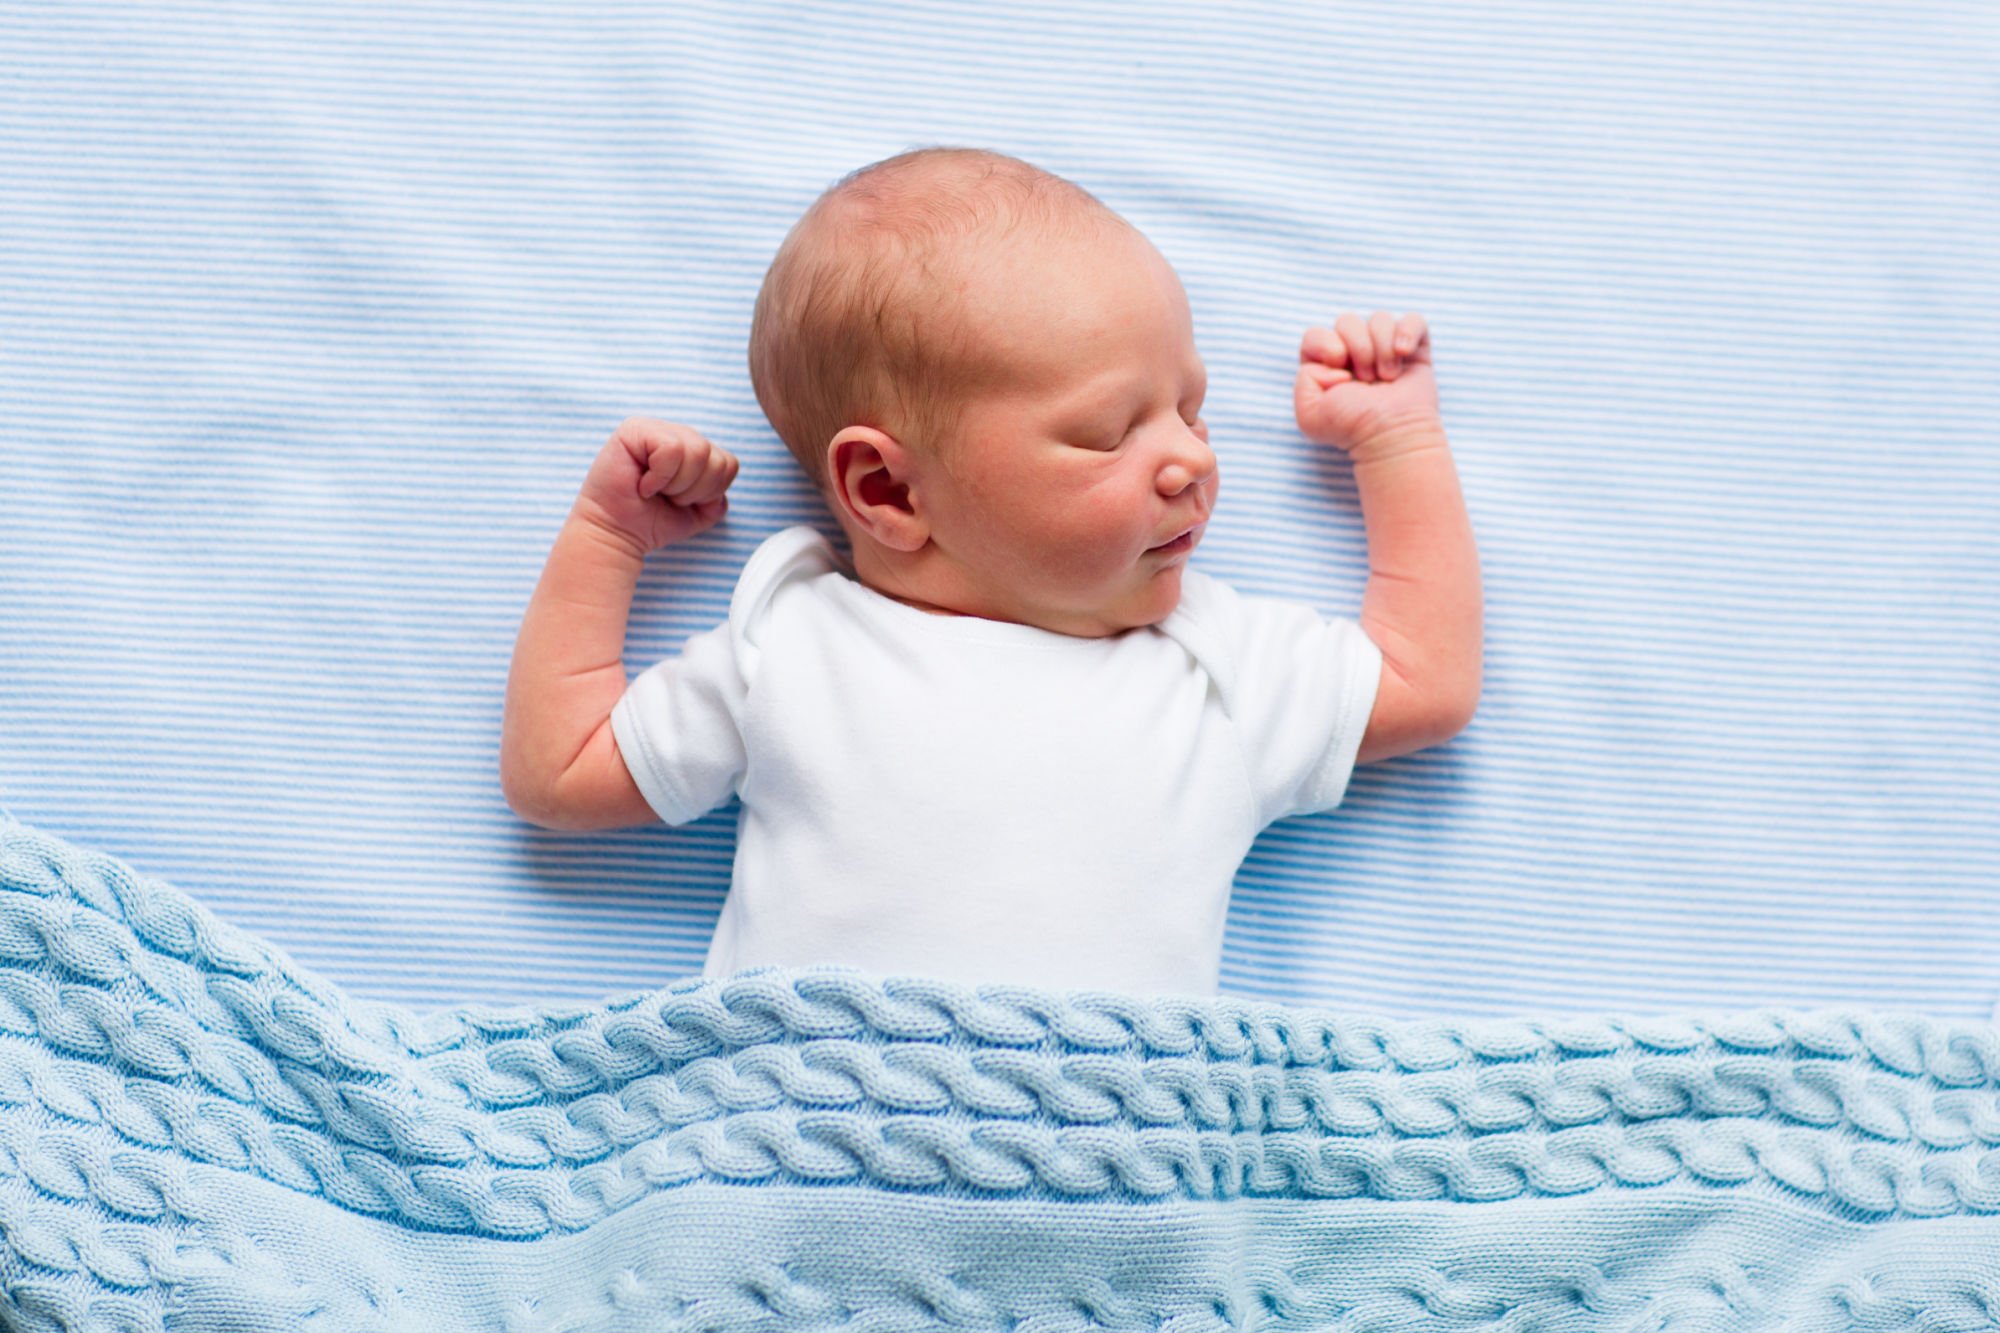 Sleeping baby on blue sheet with white onesie covered by blue knitted blanket_PBB.jpg